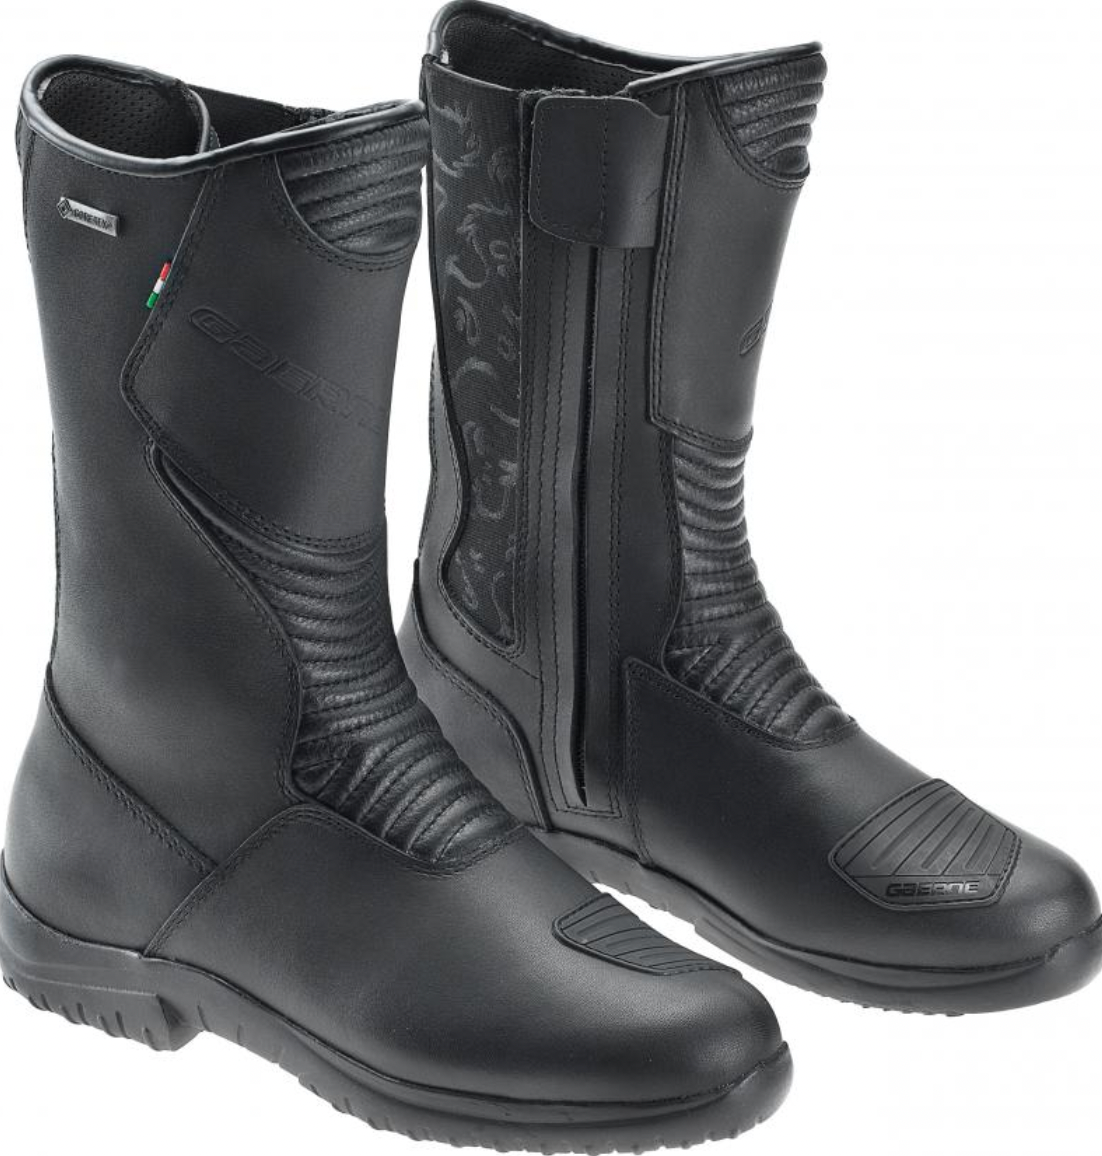 Black motorcycle boots for women